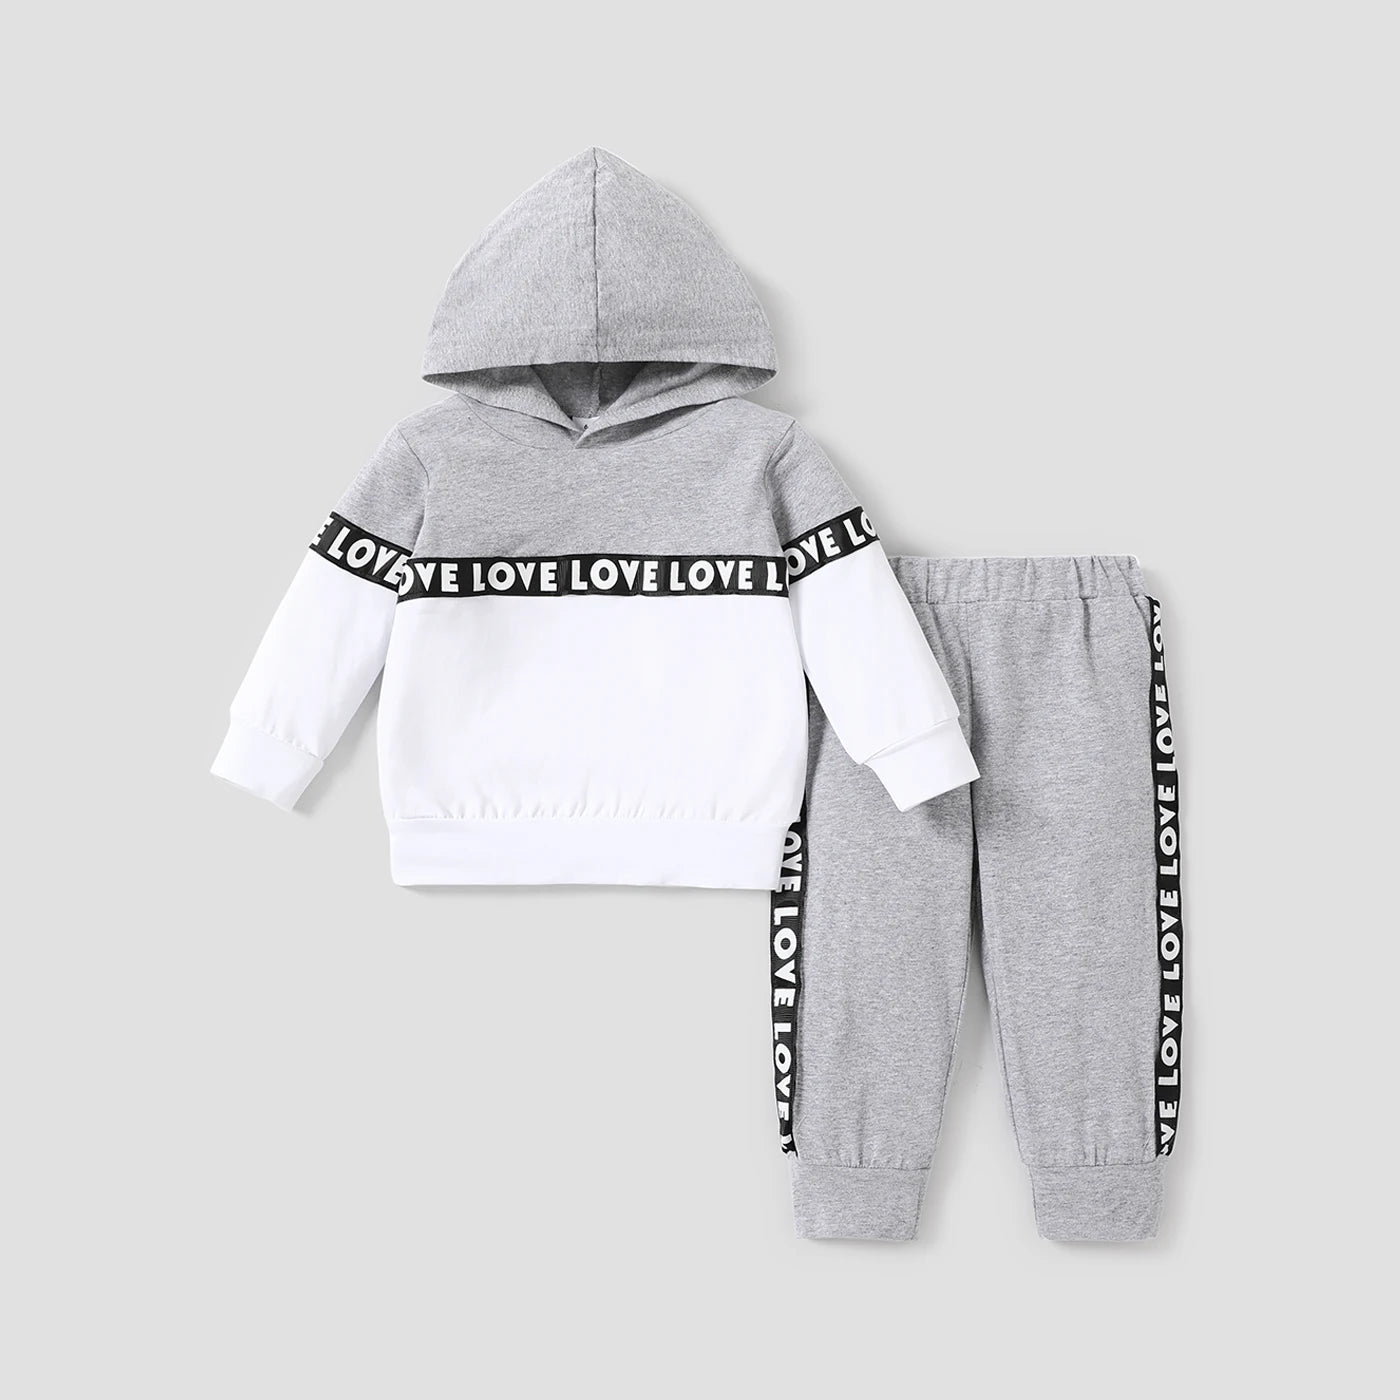 Cute Baby Spring/Autumn Sports Suit with Hat